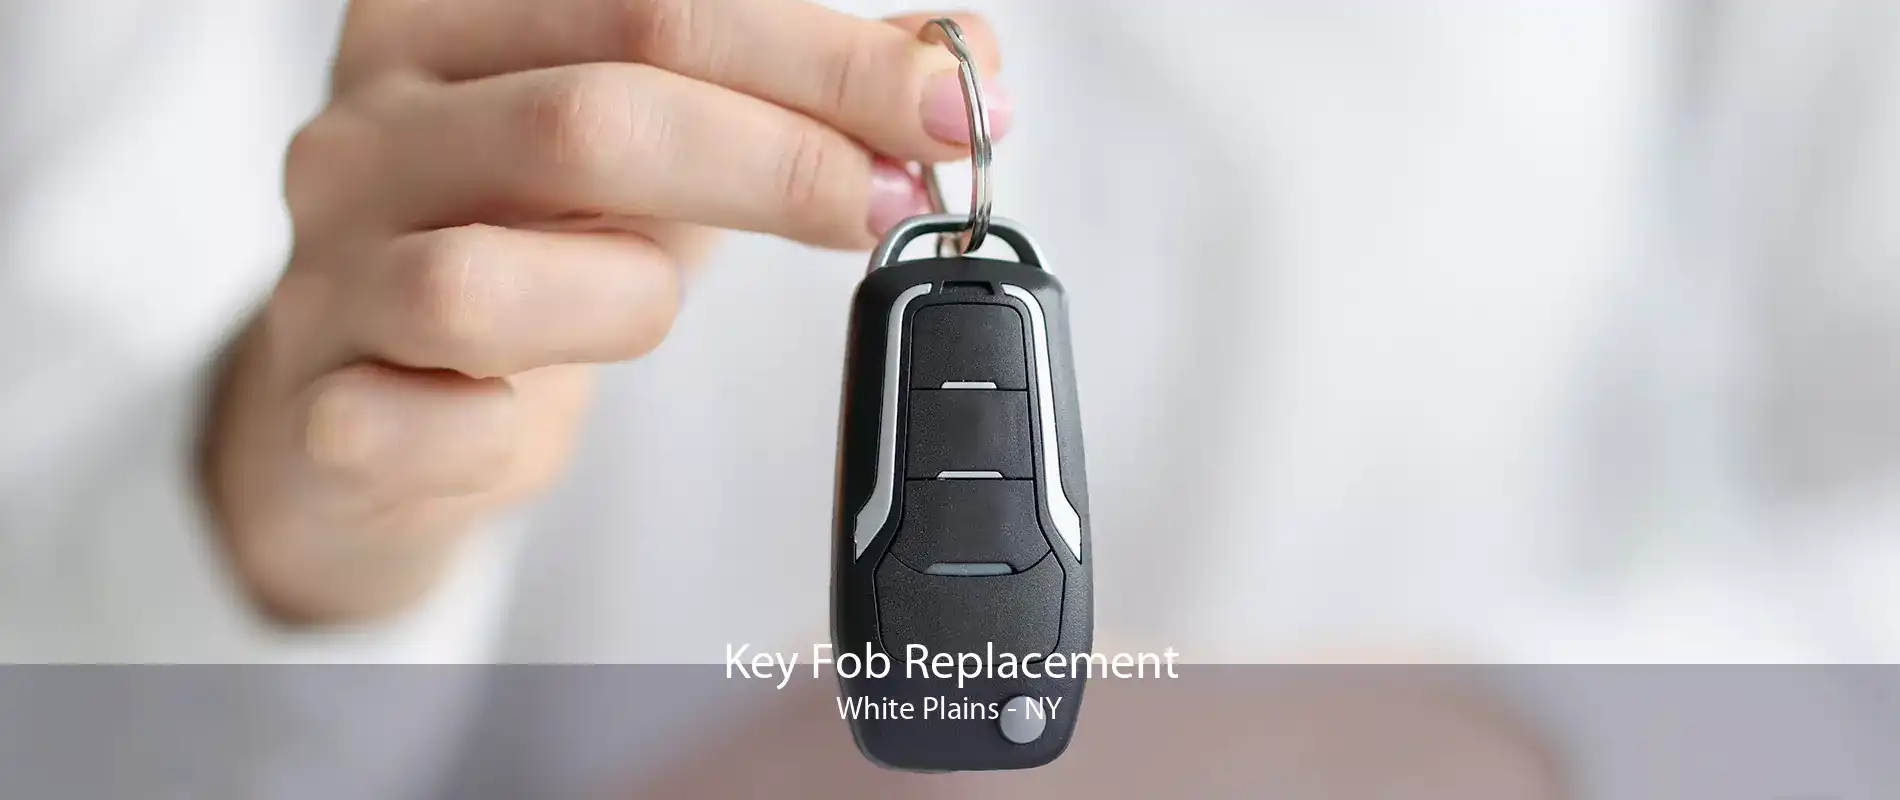 Key Fob Replacement White Plains - NY